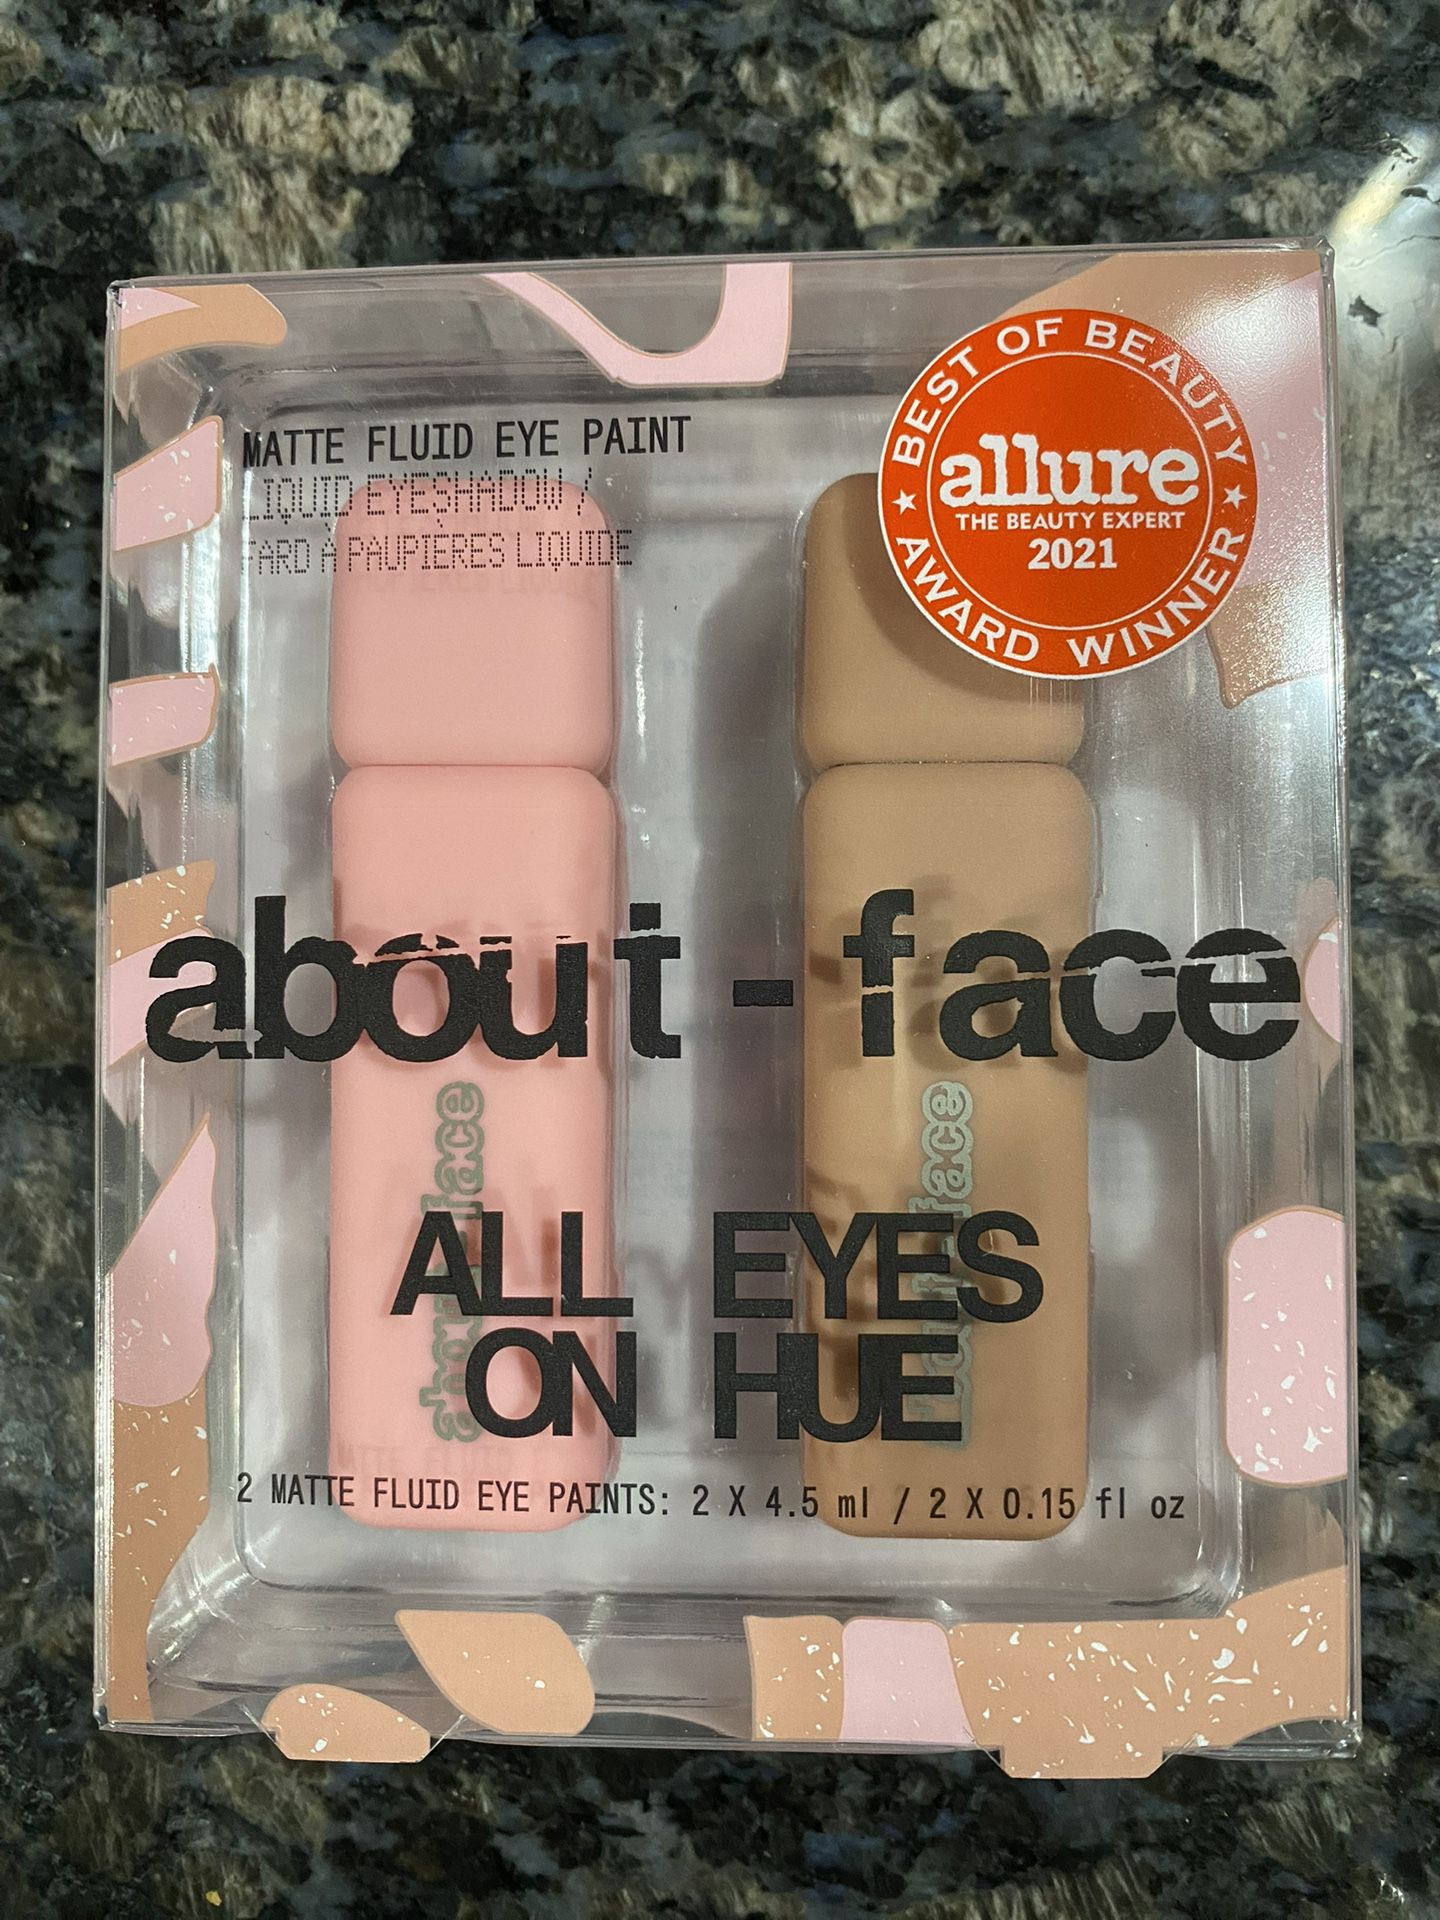 NEW ABOUT-FACE ALL EYES ON HUE 2 MATTE FLUID EYE PAINTS $7!!